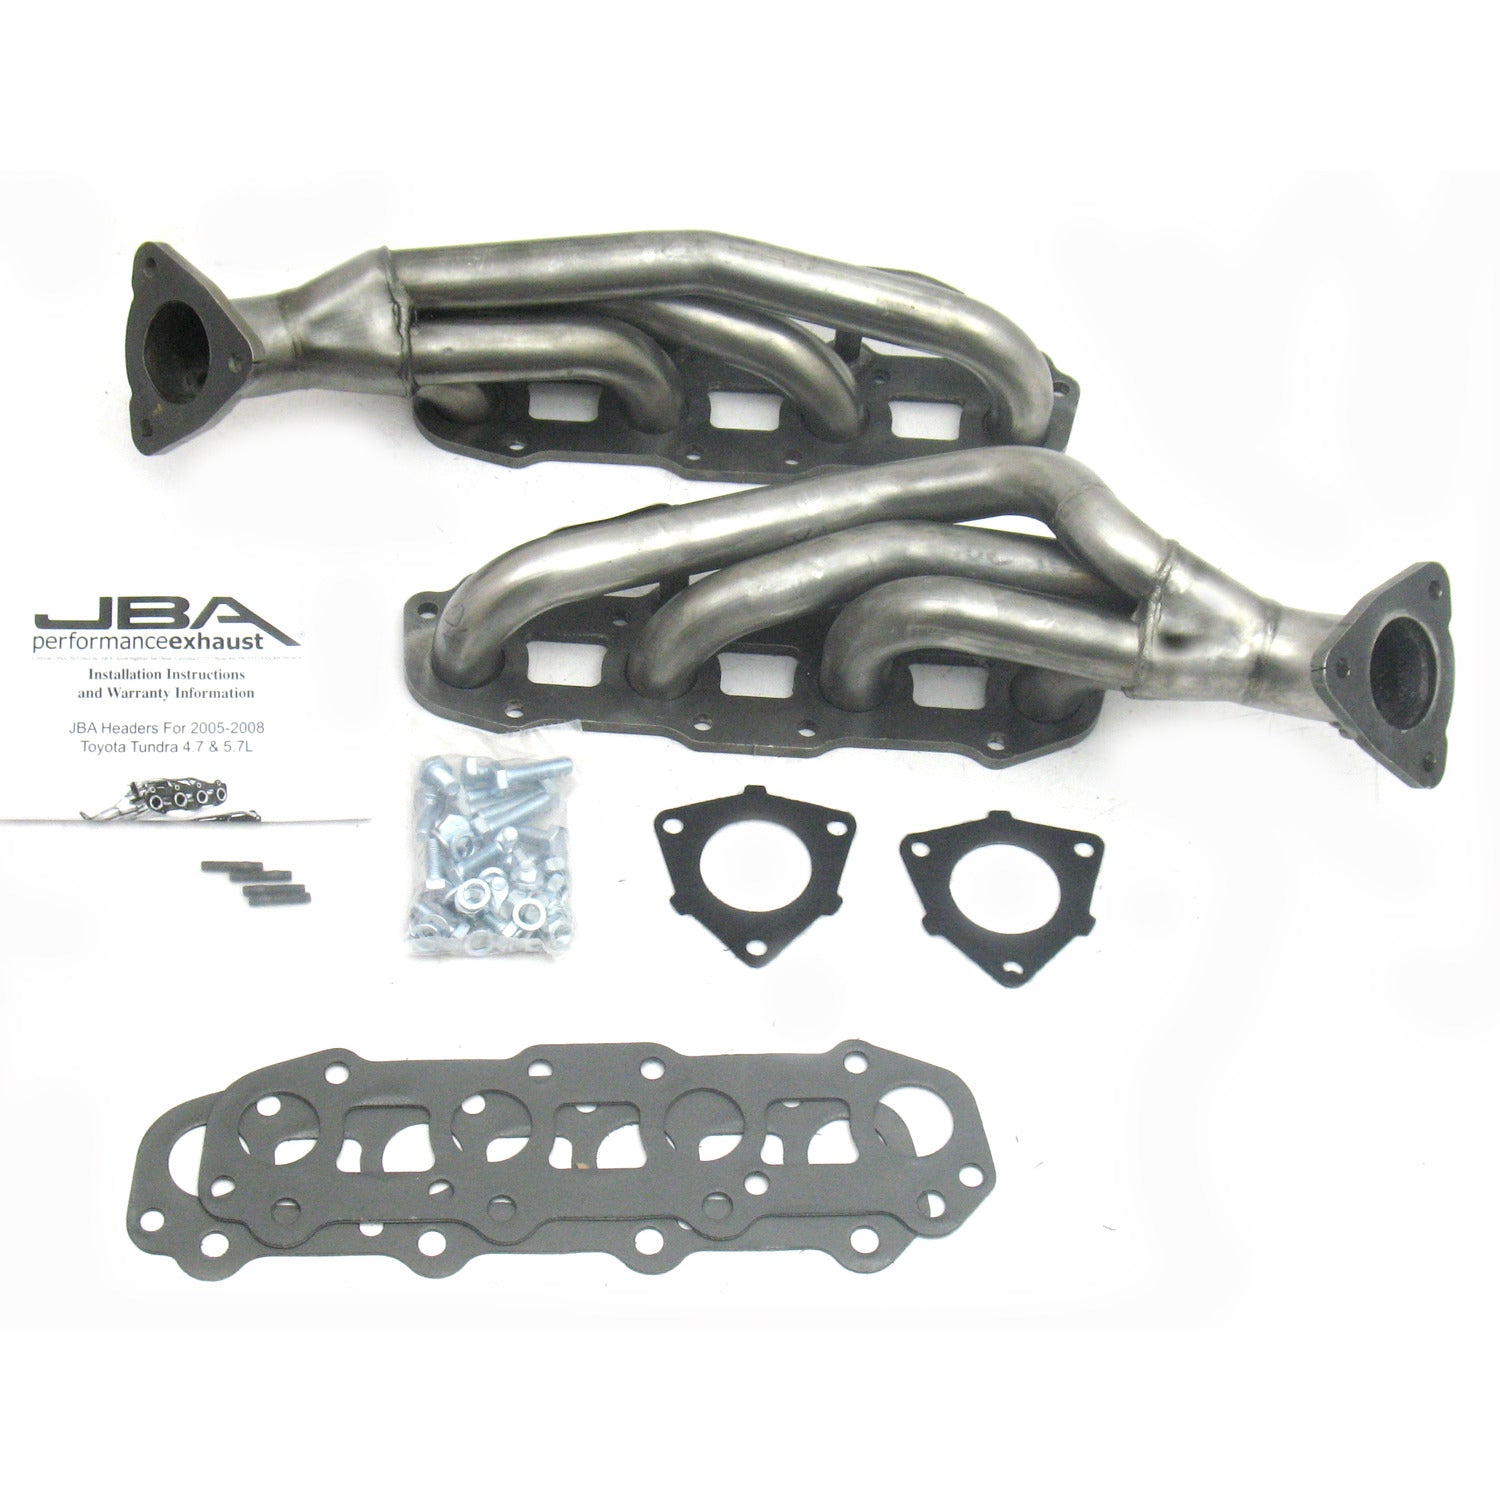 JBA Performance Exhaust 2011S 1 1/2" Header Shorty Stainless Steel 05-06 Tundra/Sequoia 4.7L